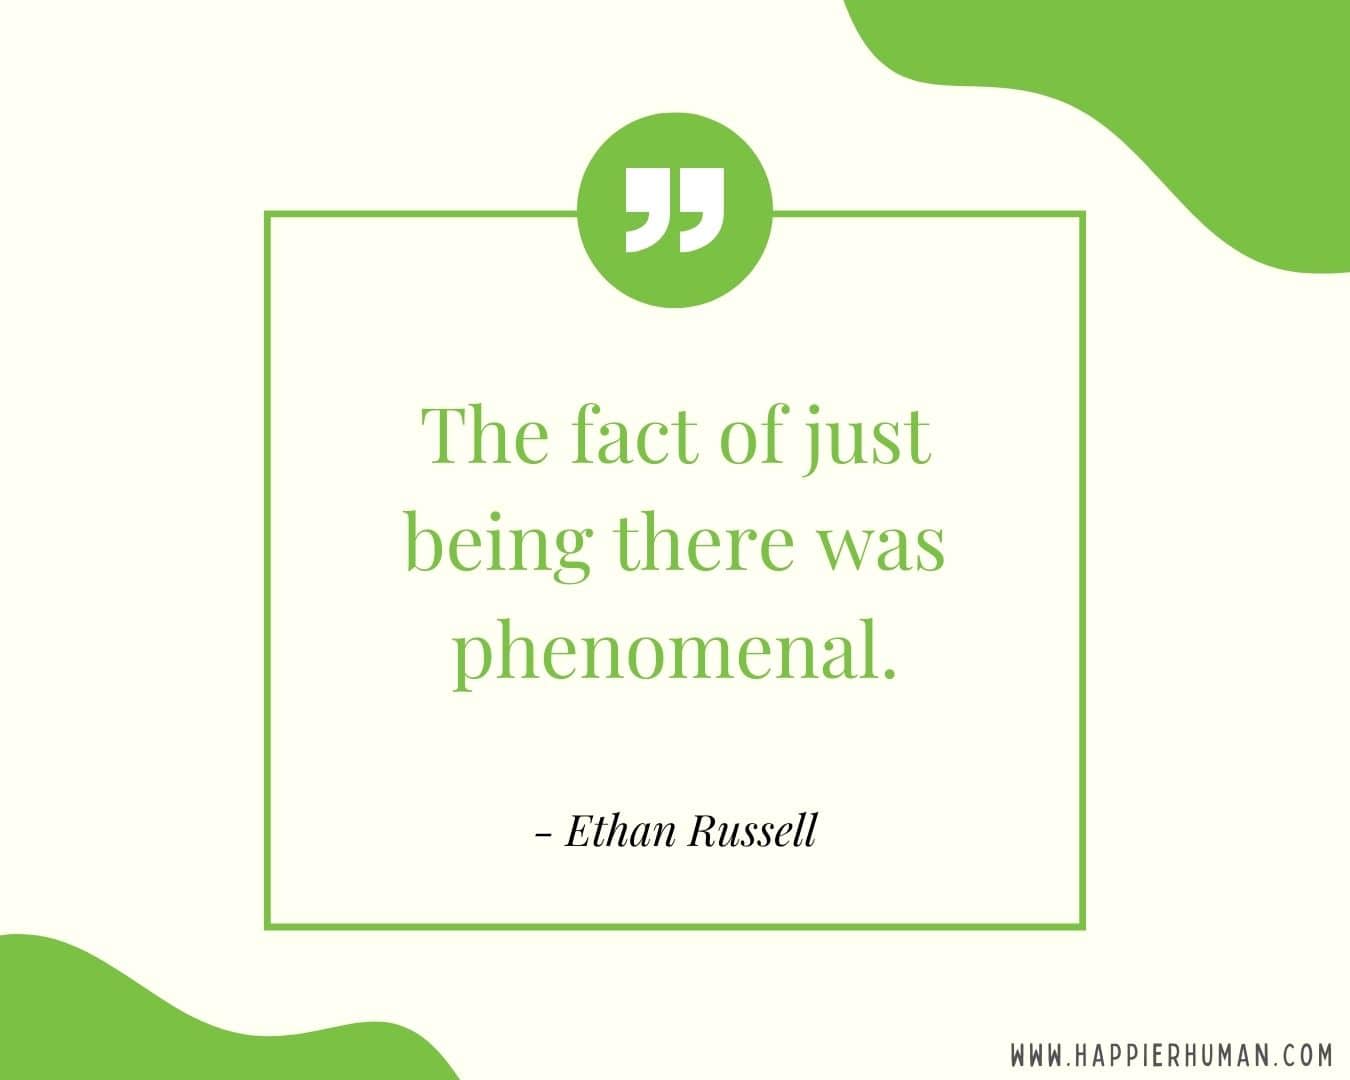 I’m Here for You Quotes - “The fact of just being there was phenomenal.” – Ethan Russell